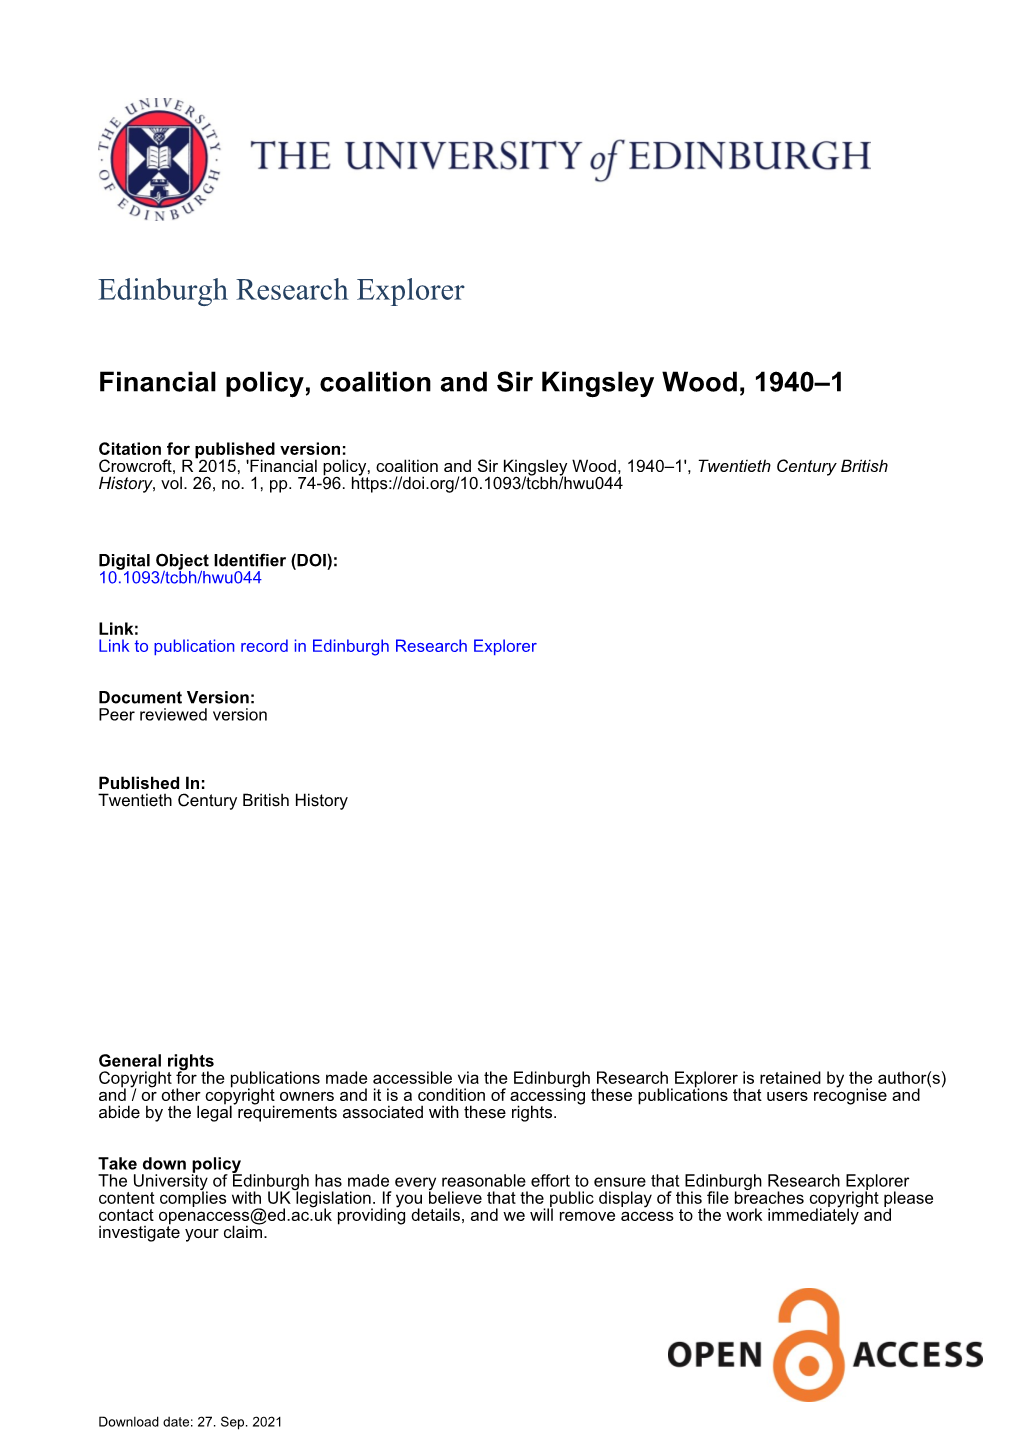 Financial Policy, Coalition and Sir Kingsley Wood, 1940–1